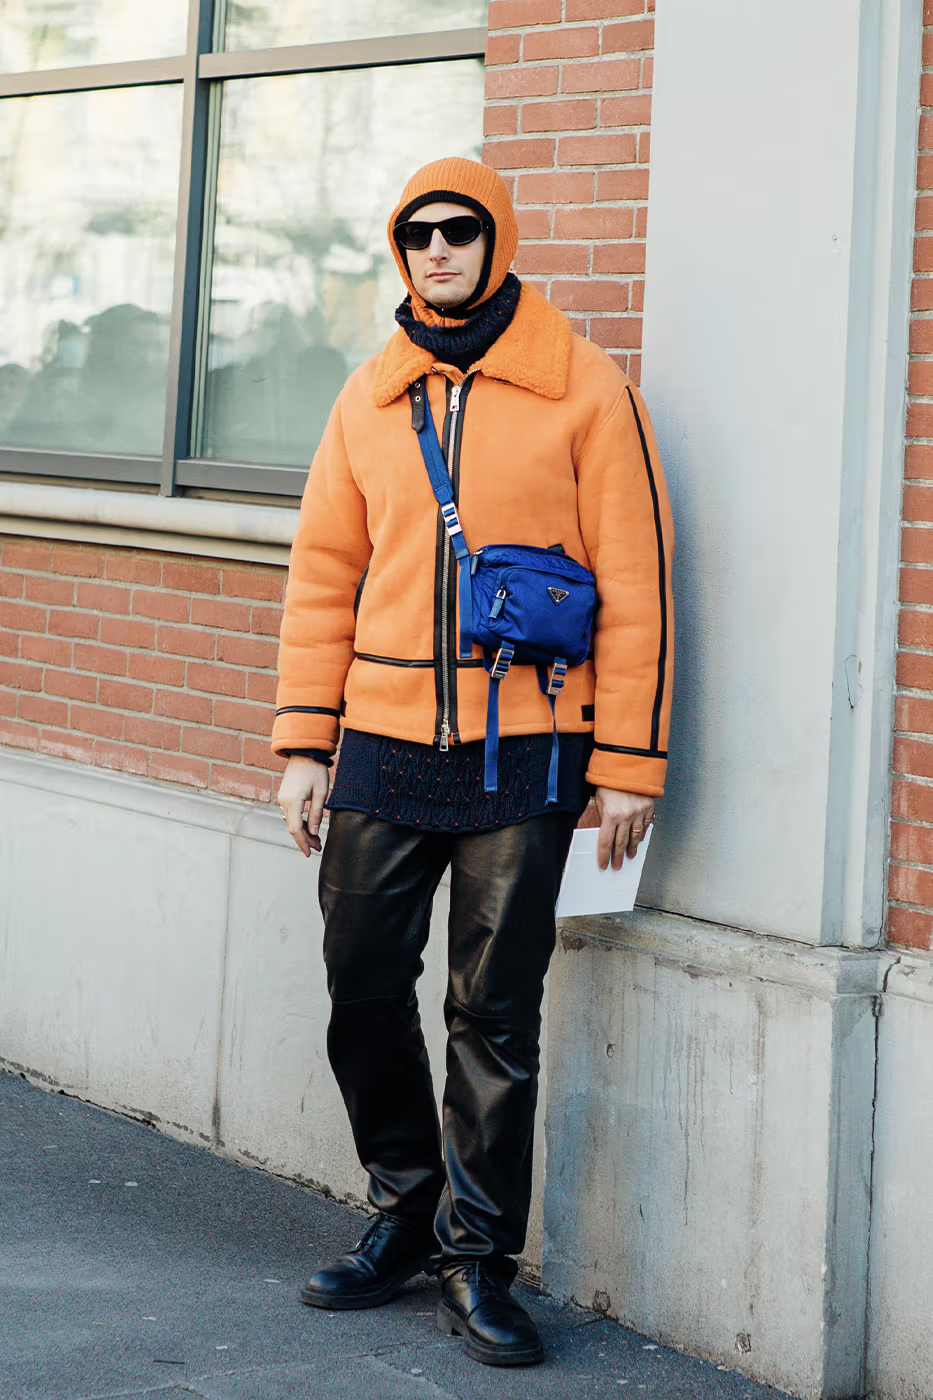 Picture showing a guy in an orange bomber jacket for the event